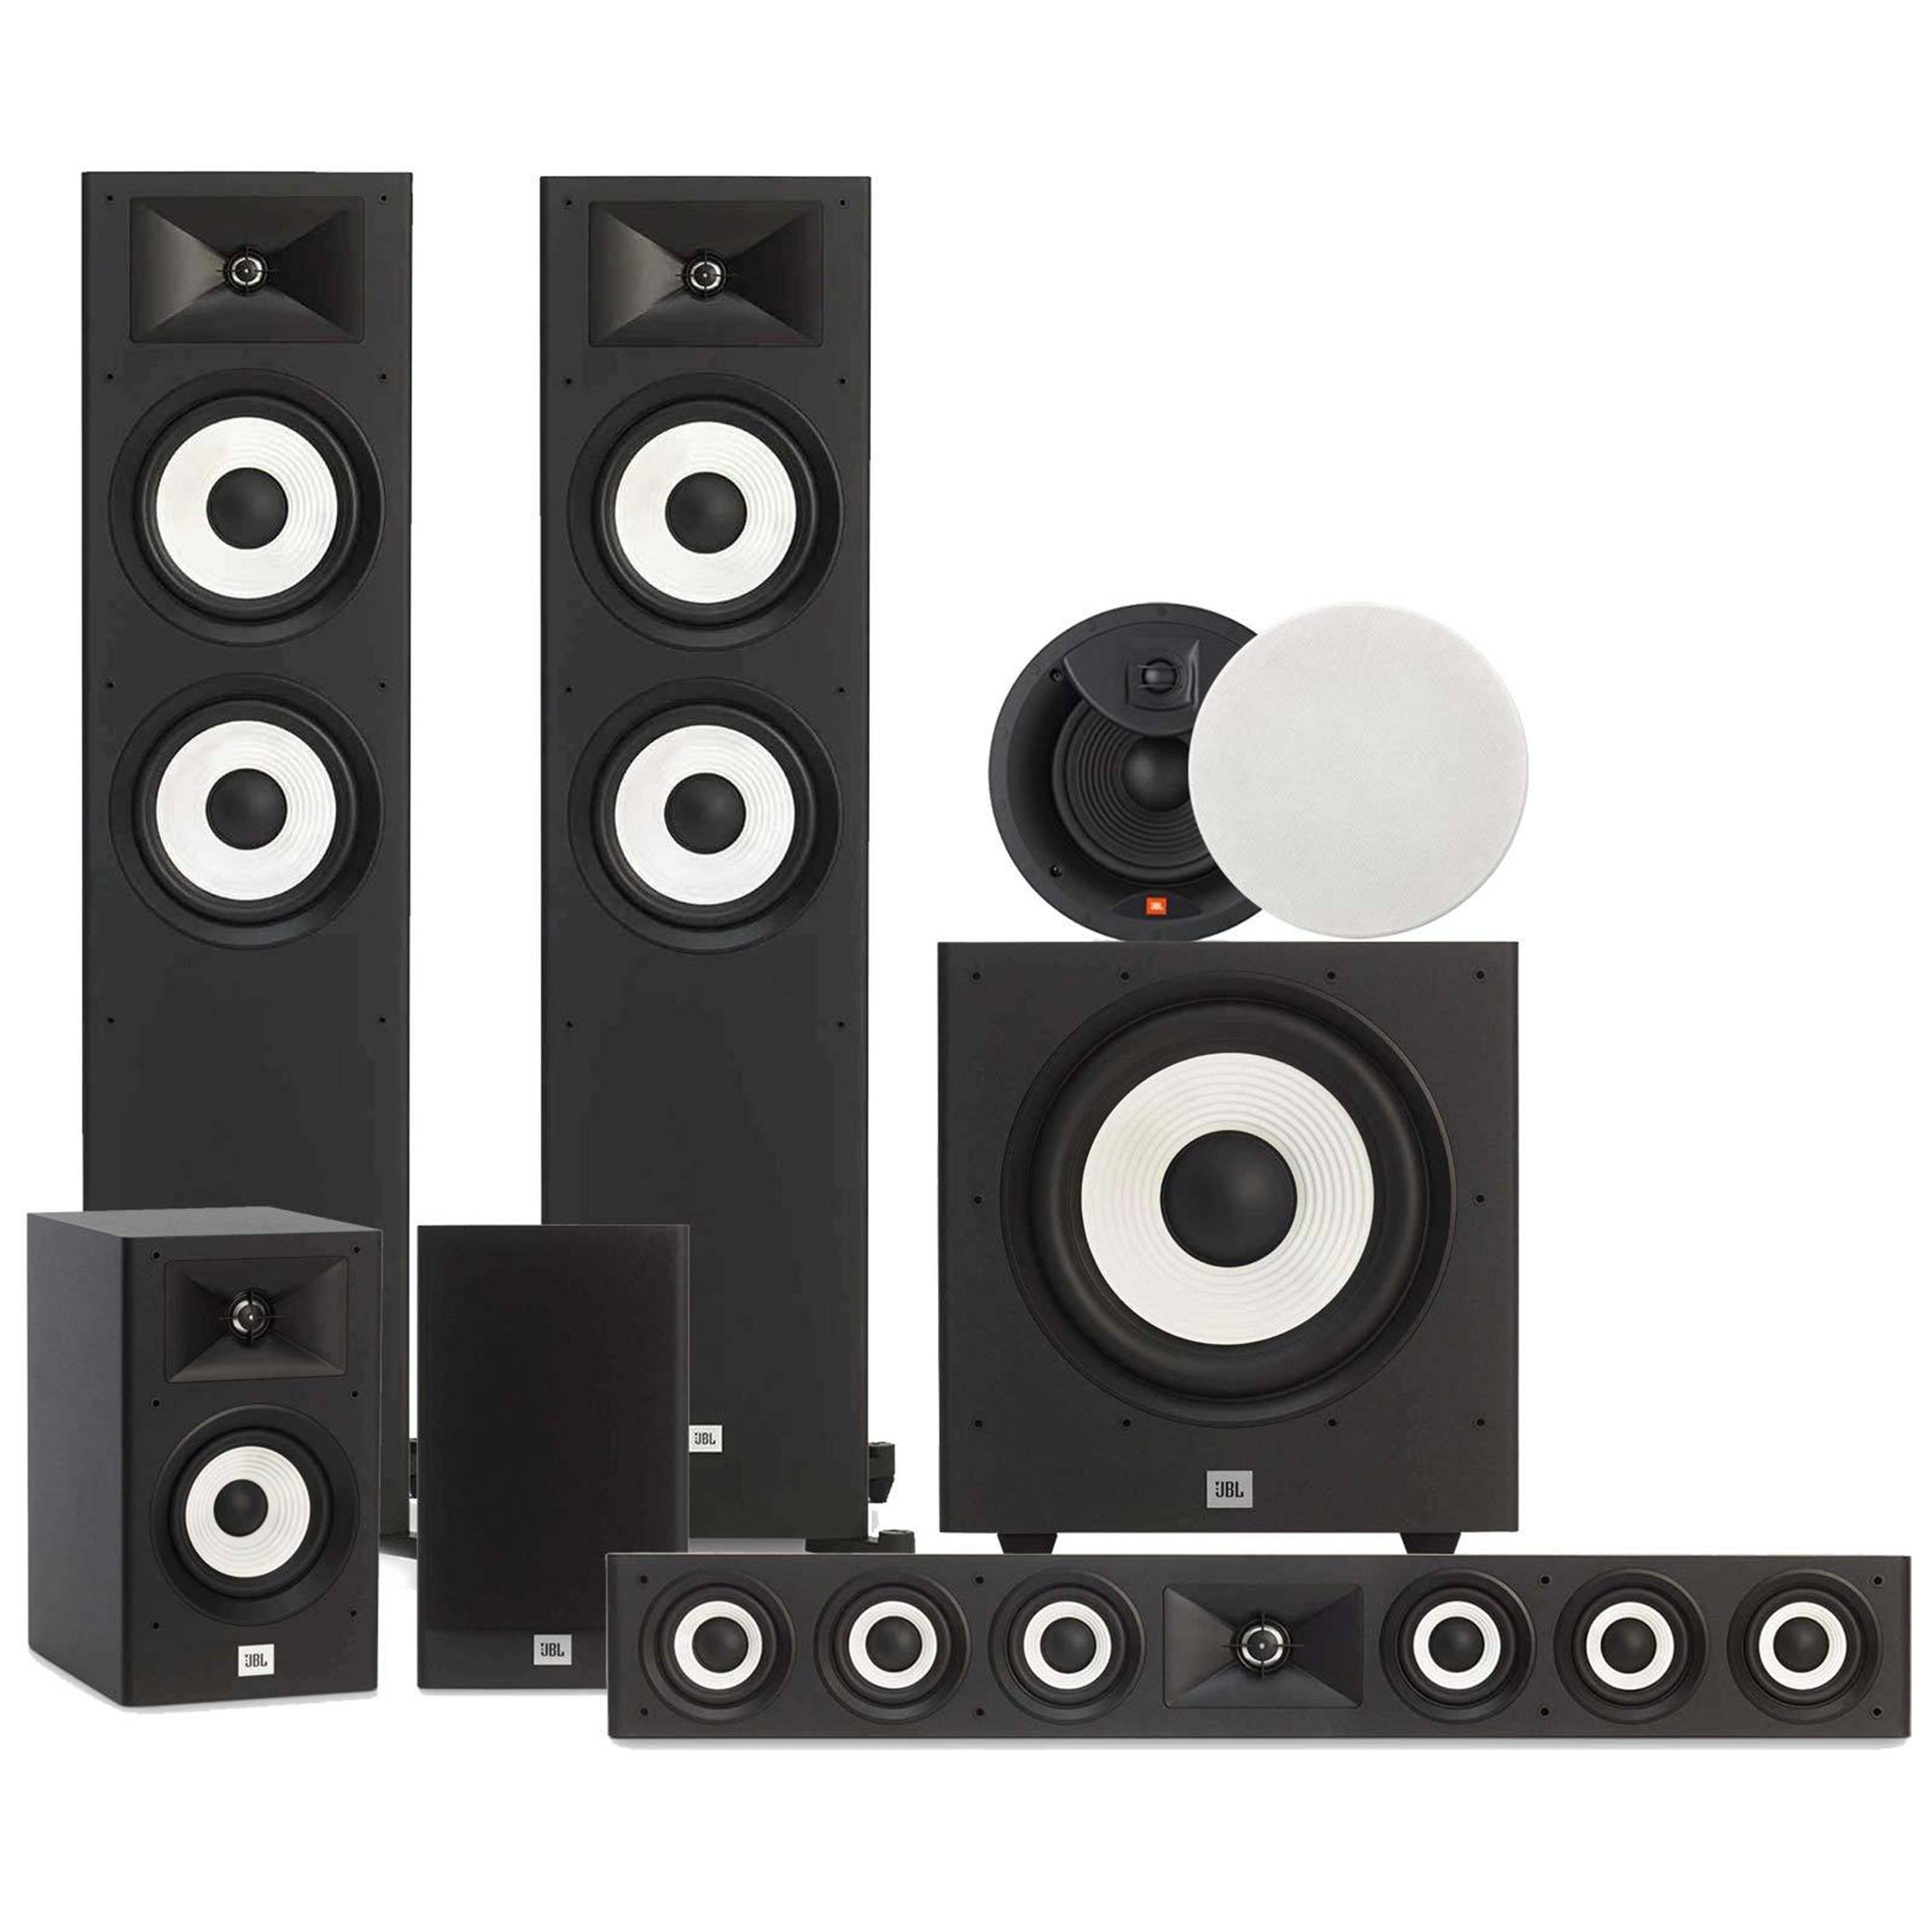 JBL Series 5.1.2 Channel- Atmos Home Theater